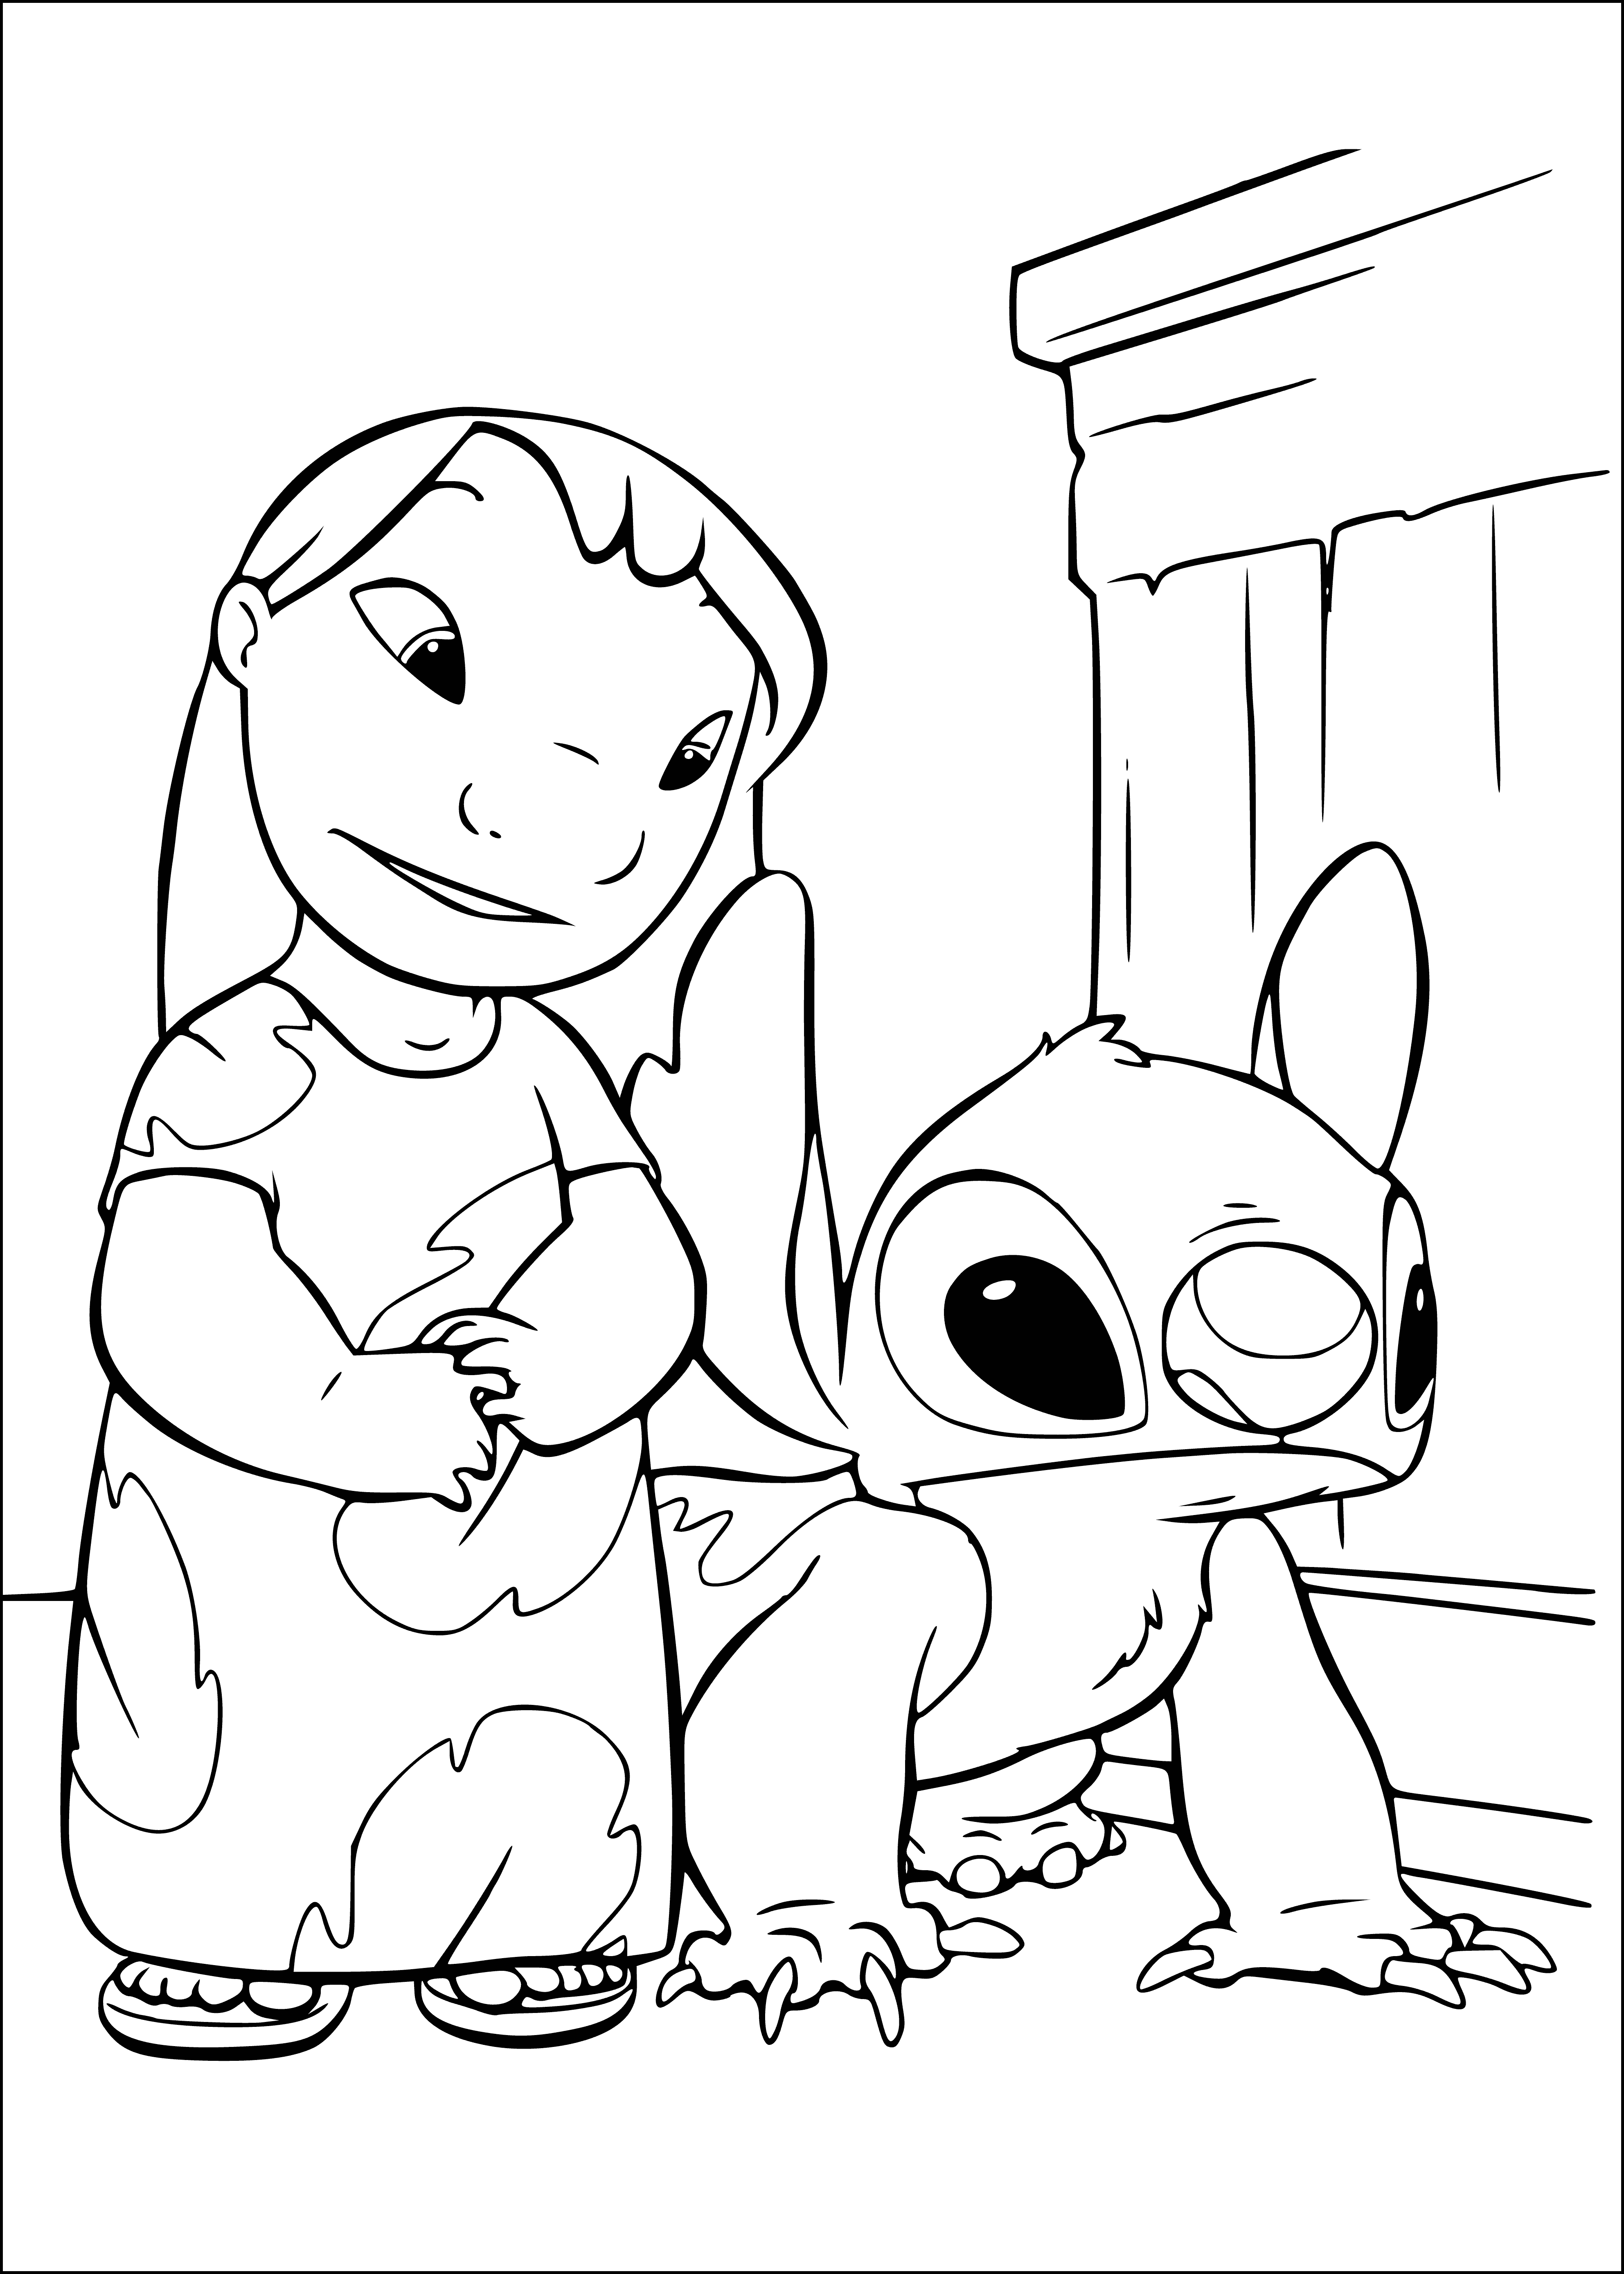 Stitch is a dog coloring page